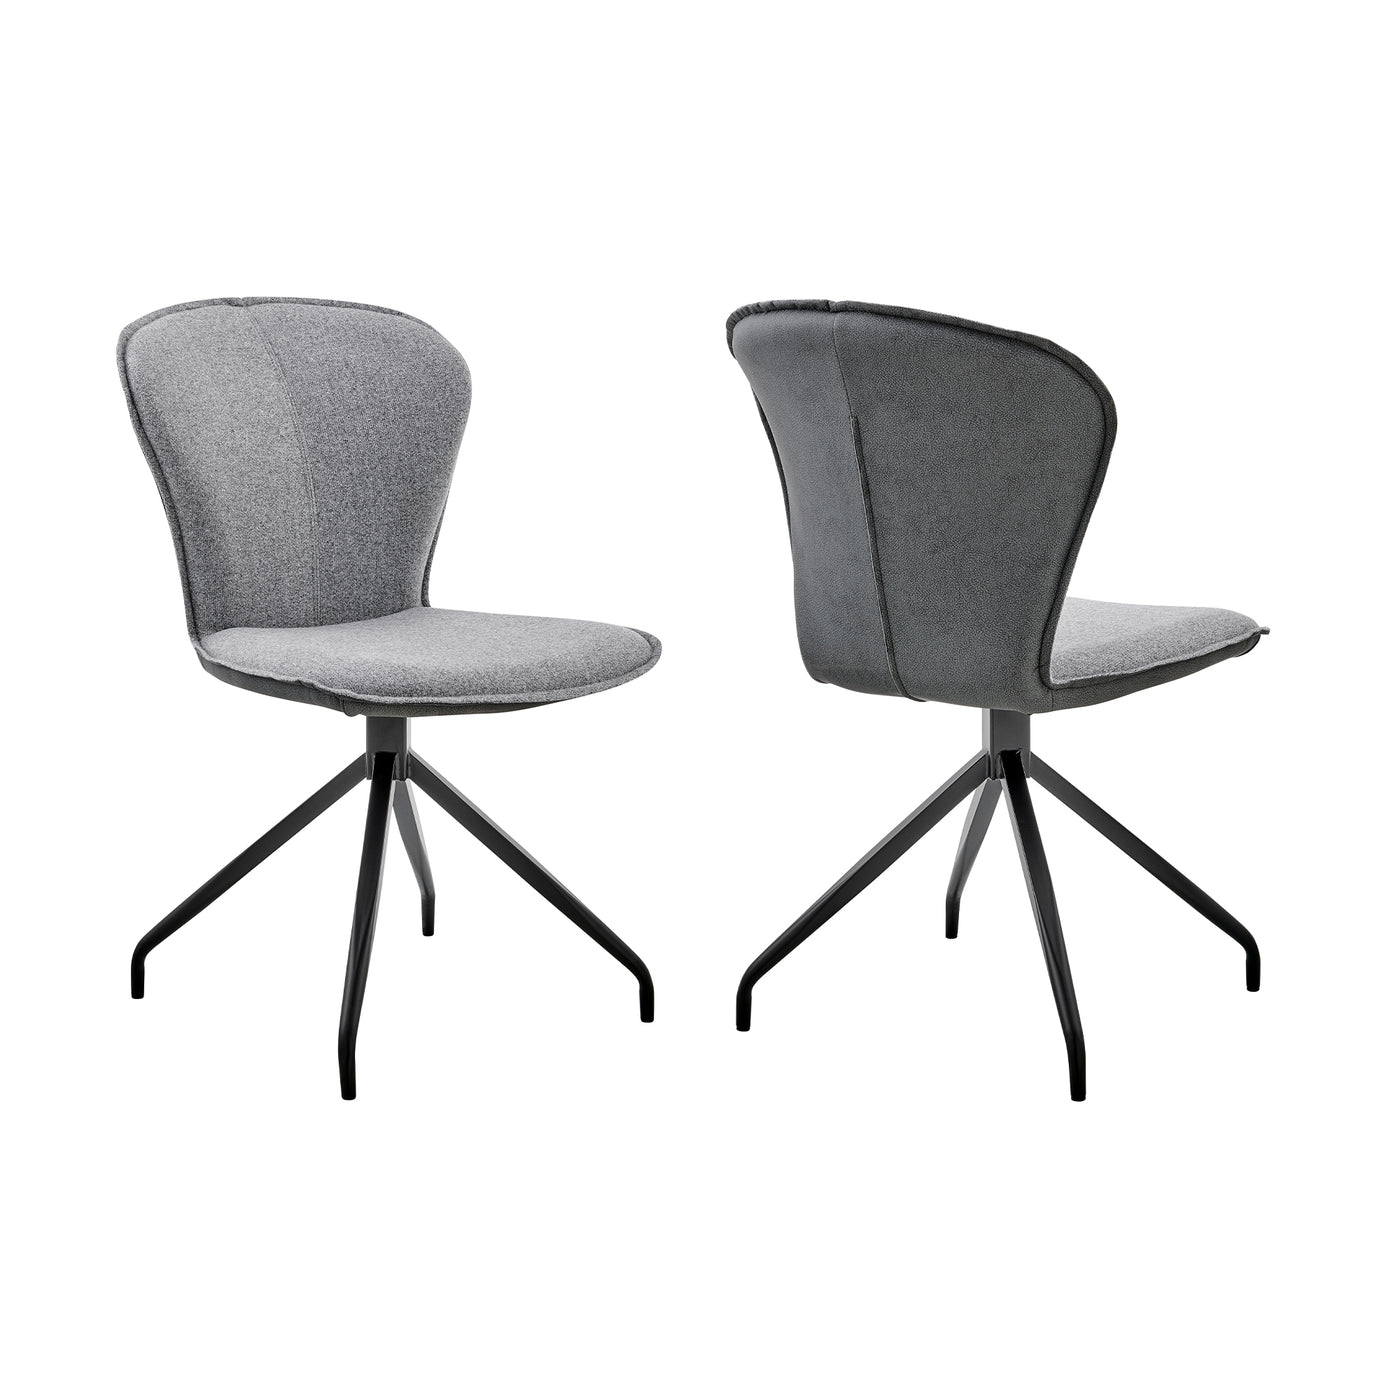 Petrie Dining Chair Set of 2